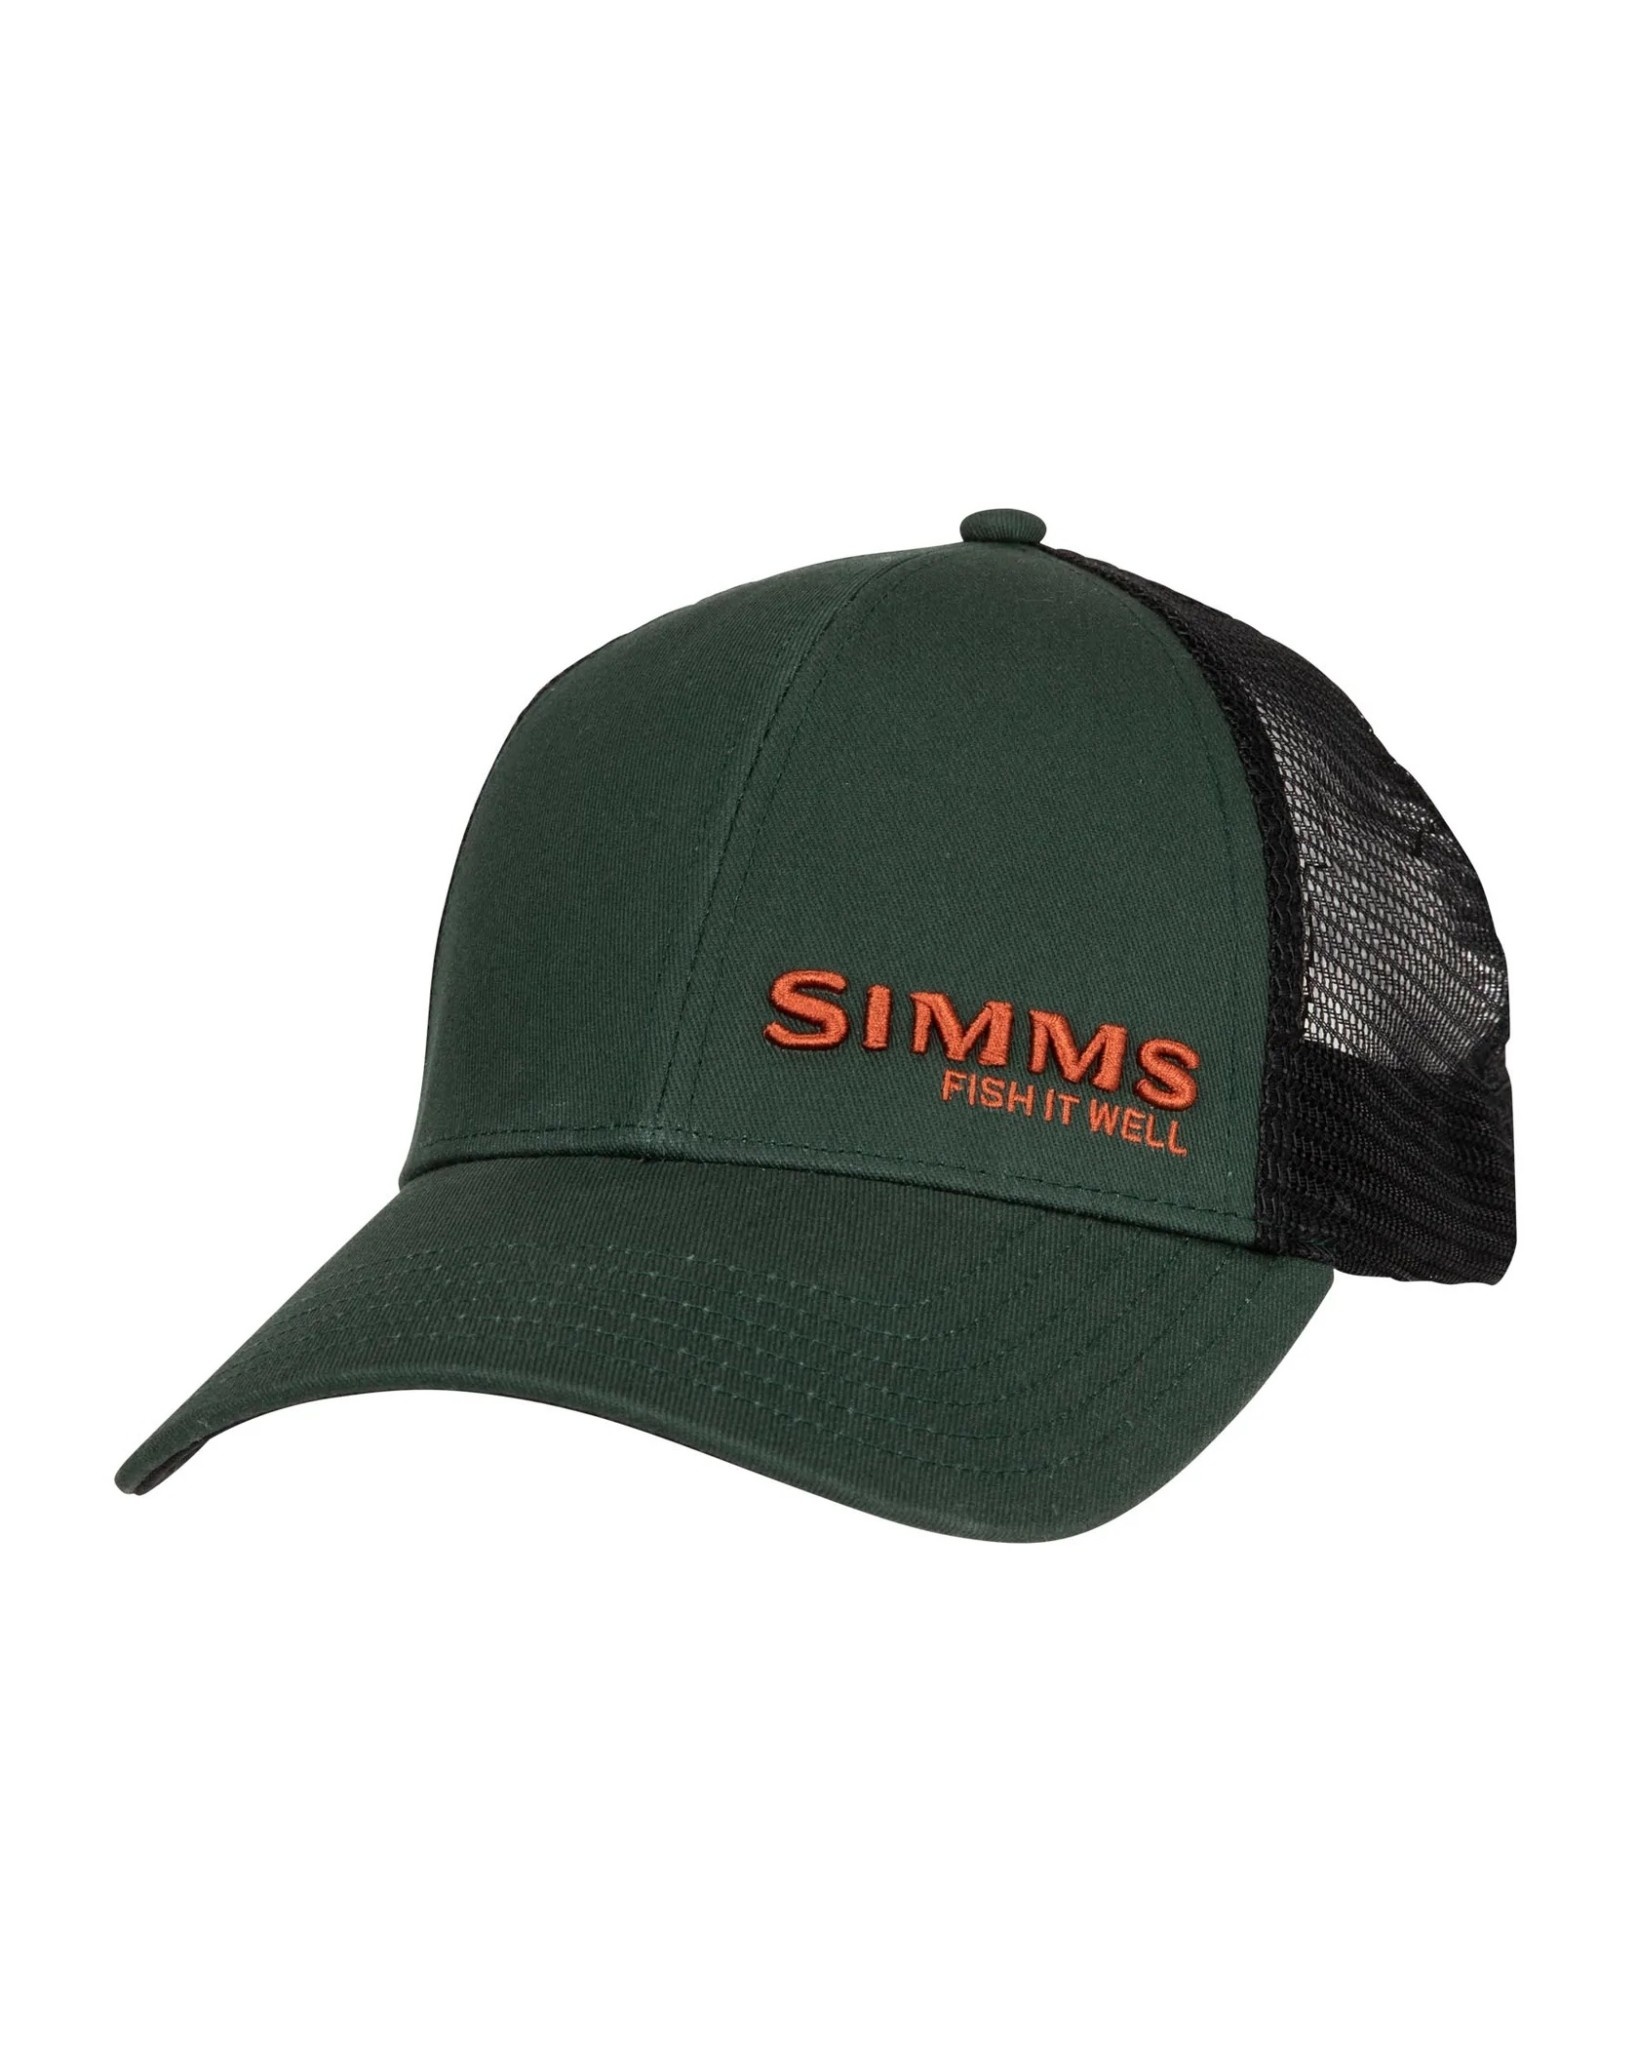 Simms Fish It Well Forever Trucker Hat, Foliage